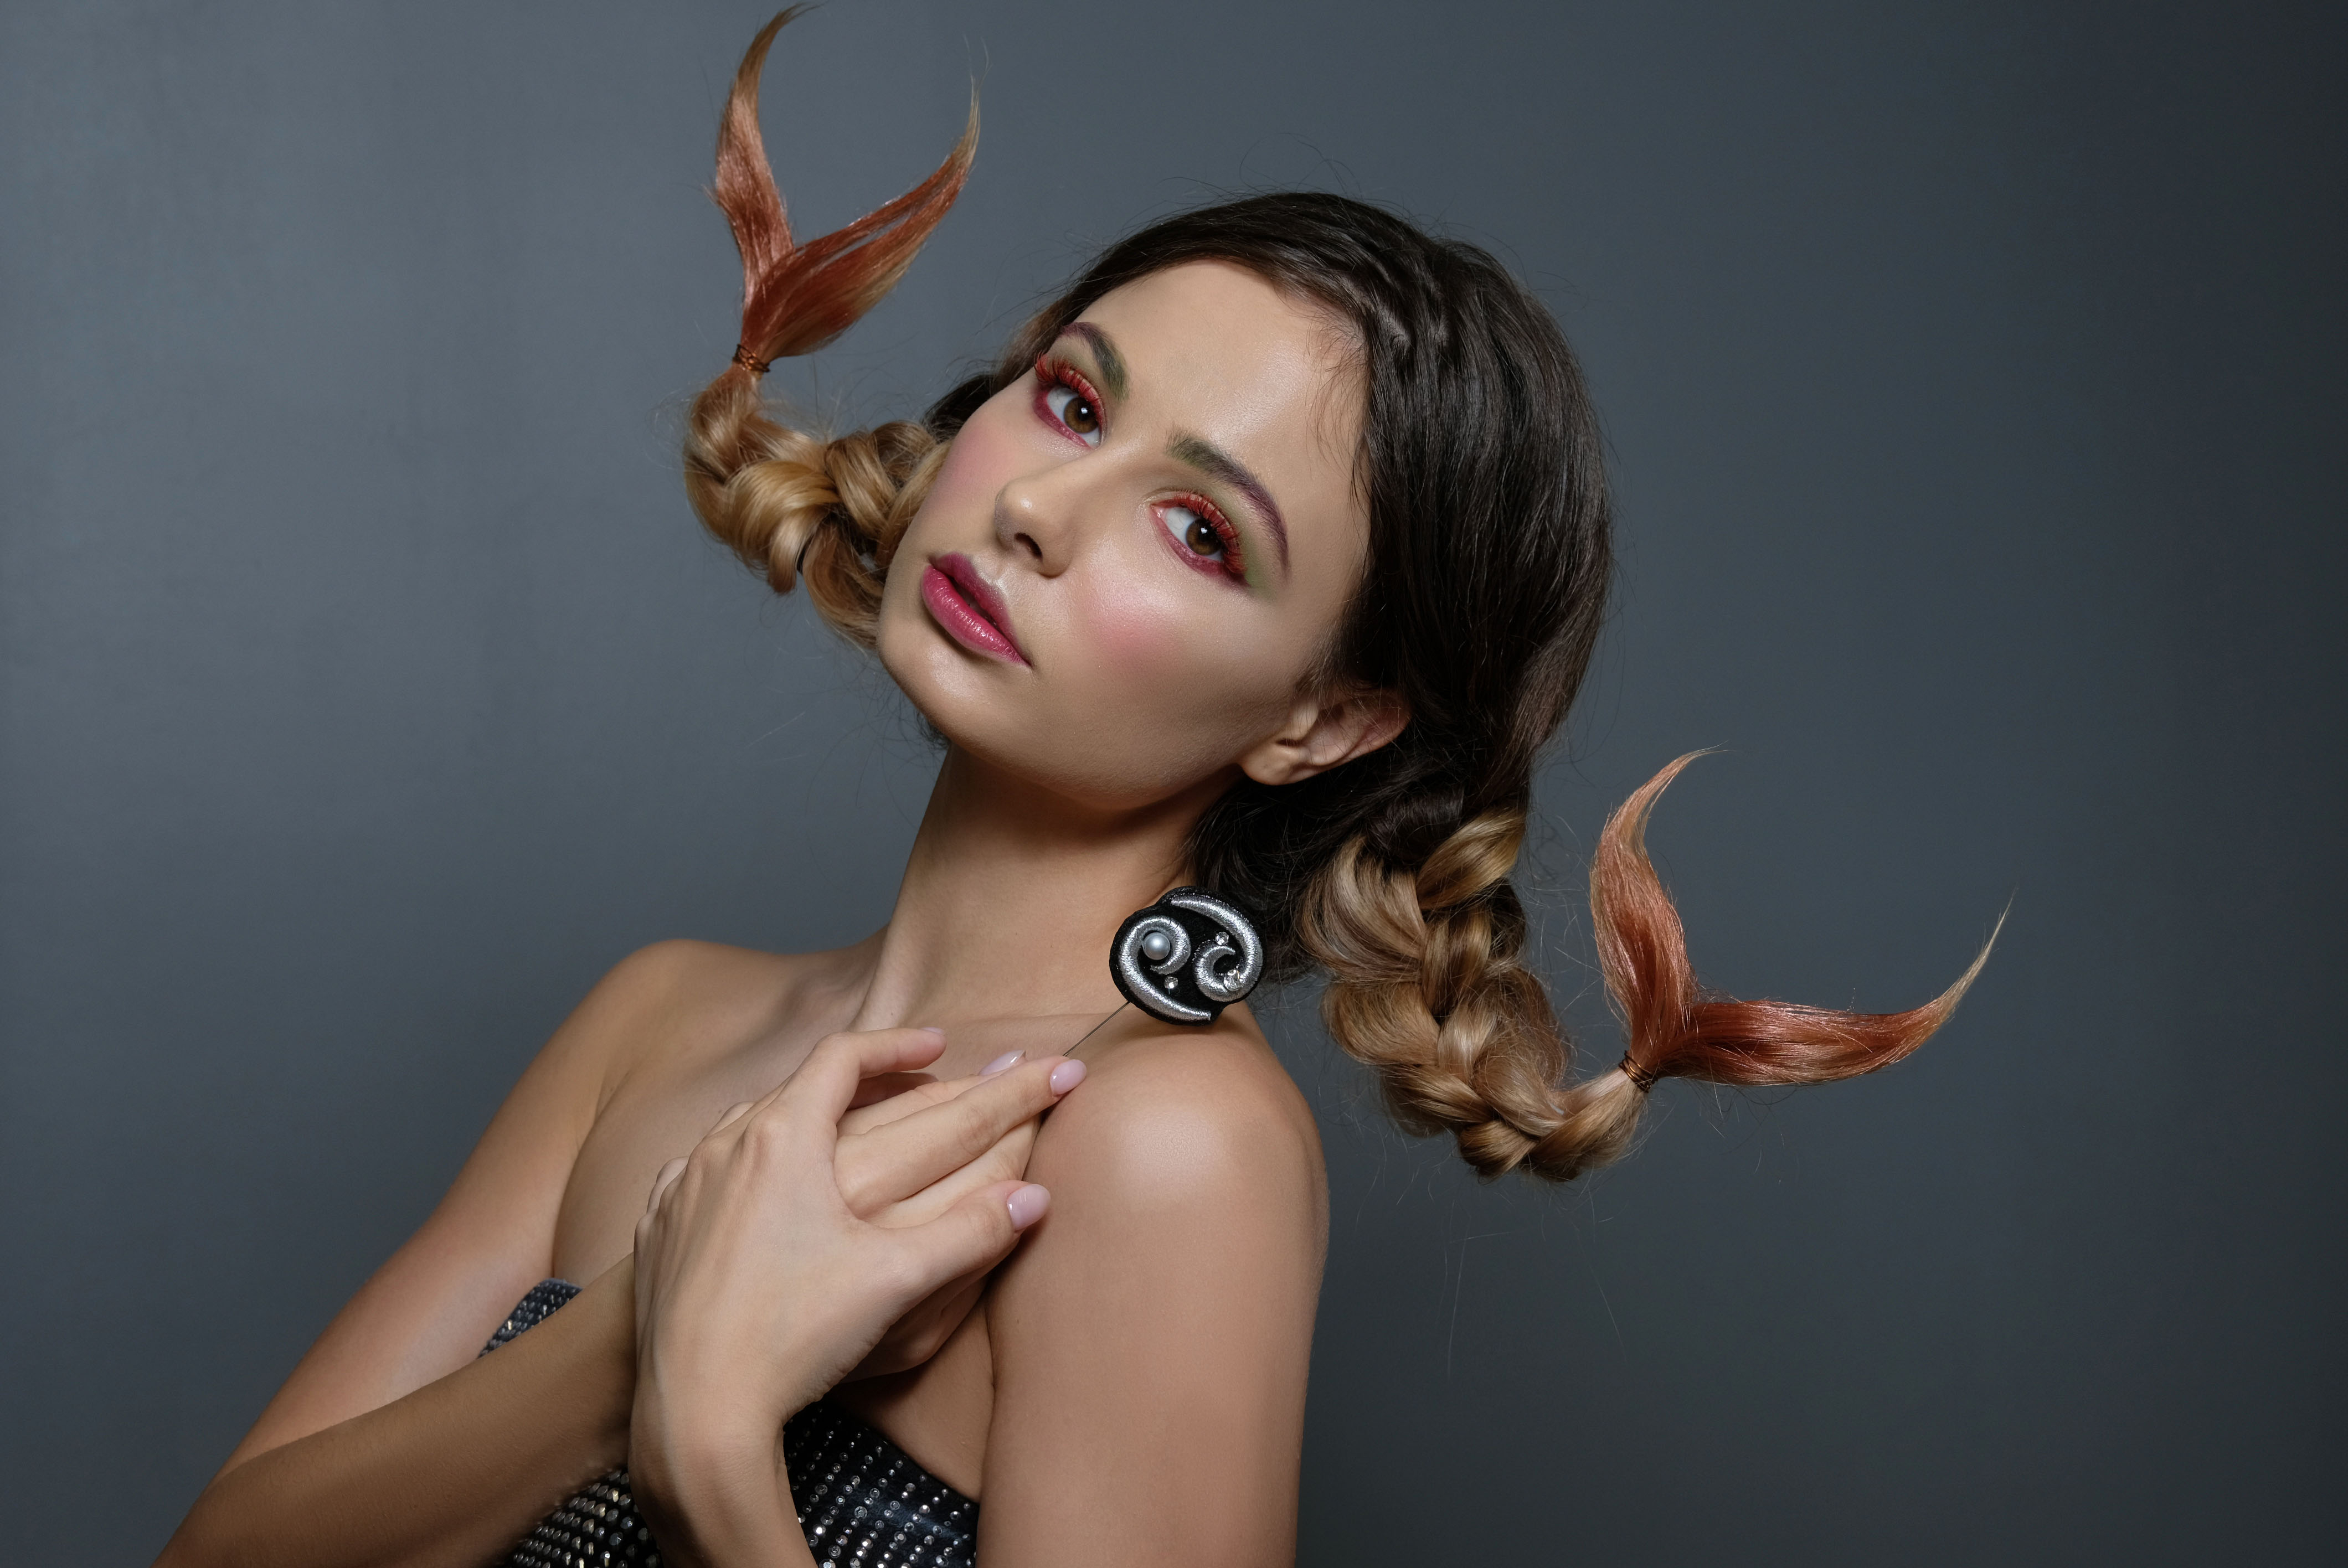 A girl holding the image of the zodiac sign Cancer | Source: Shutterstock